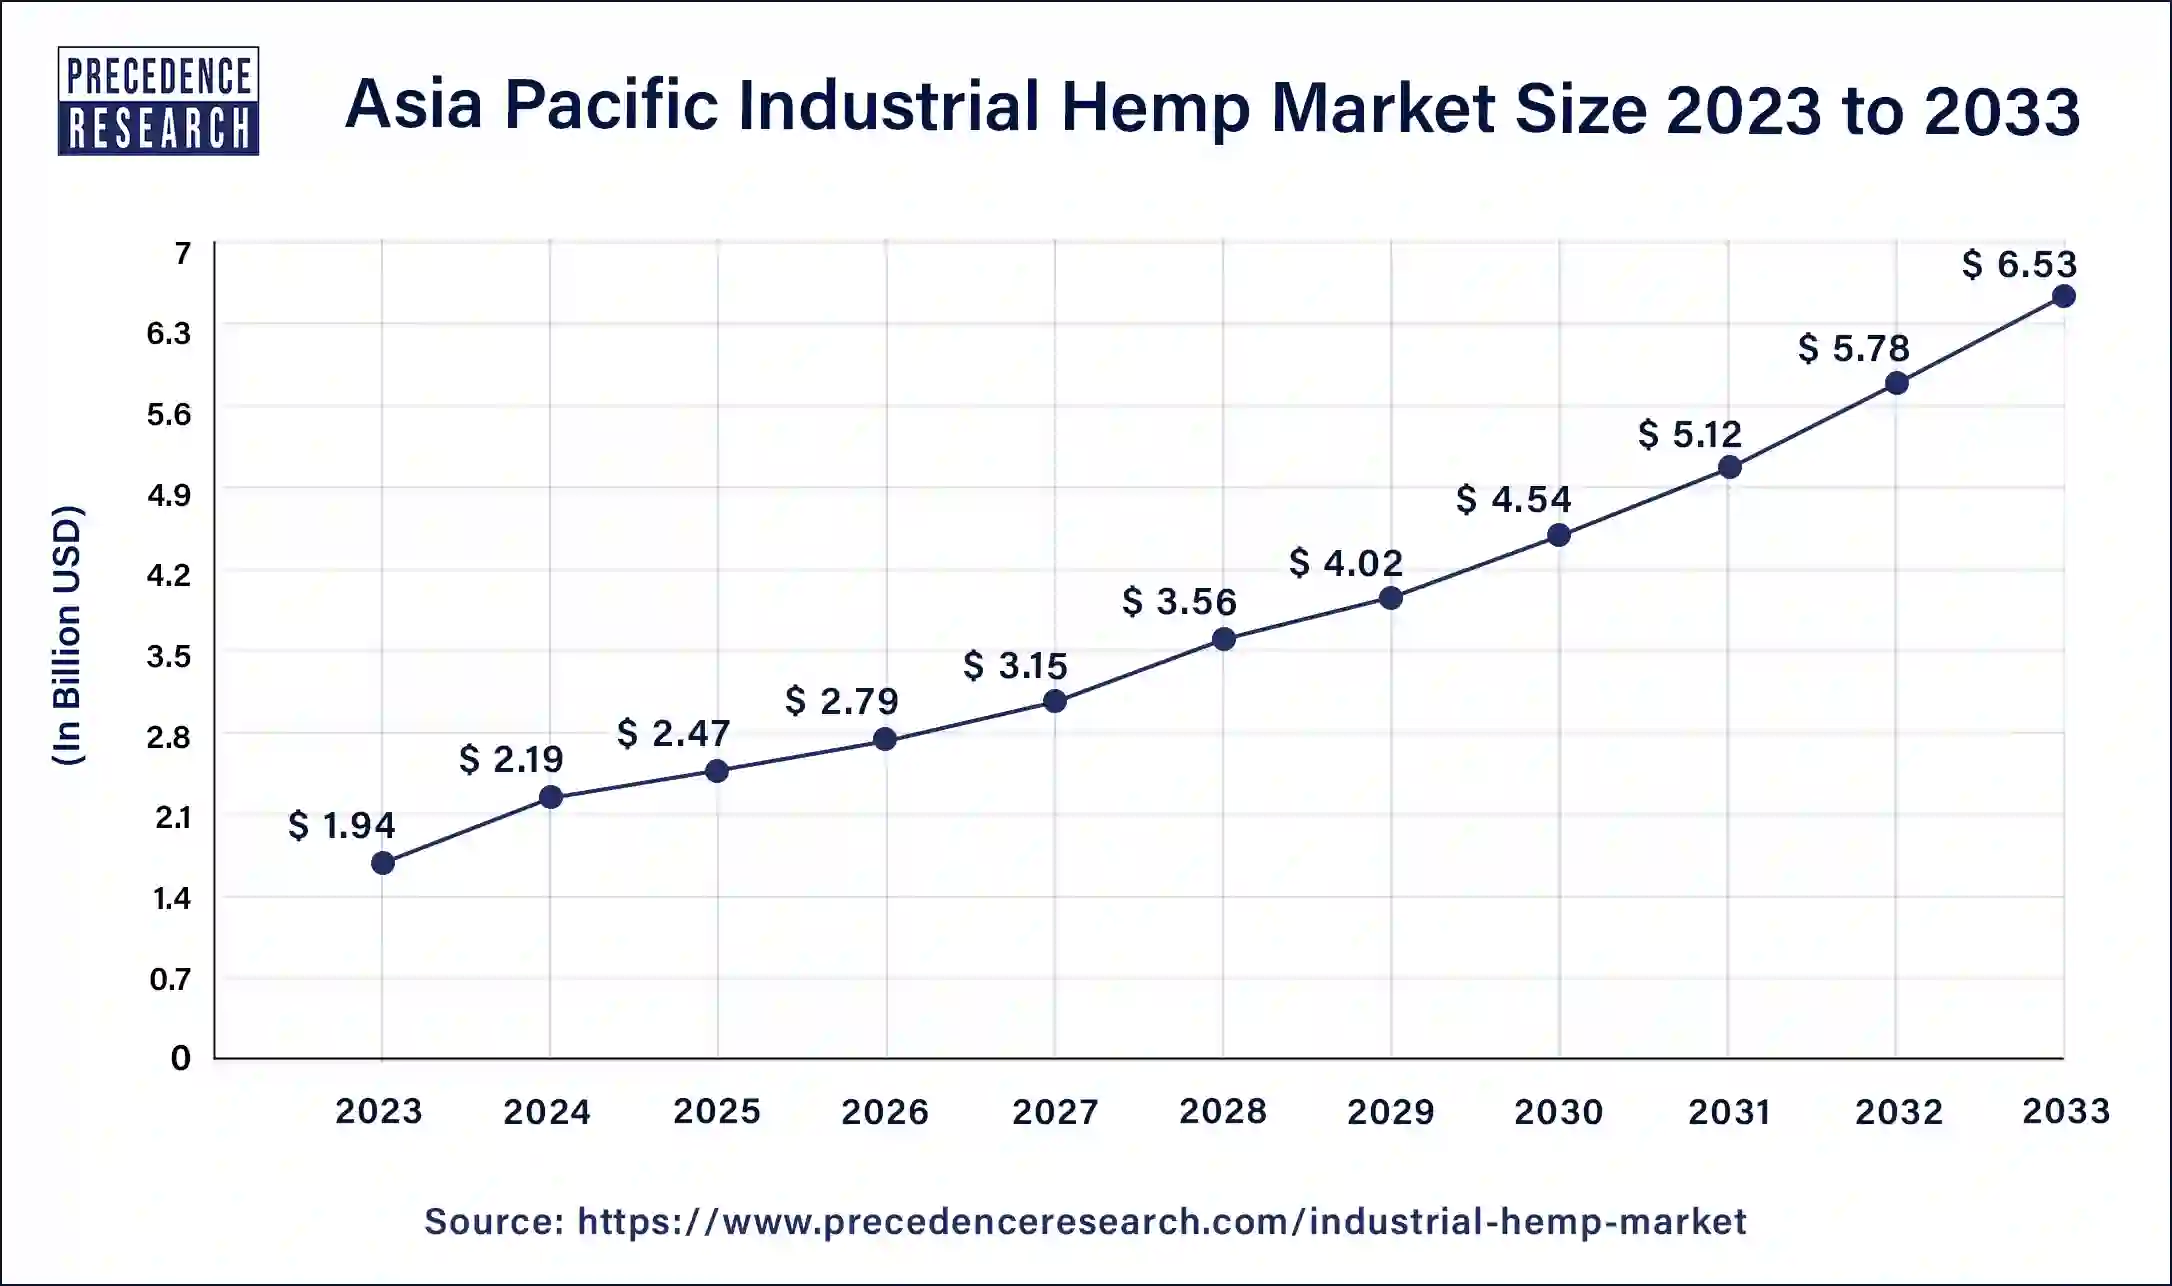 Asia Pacific Industrial Hemp Market Size 2024 to 2033